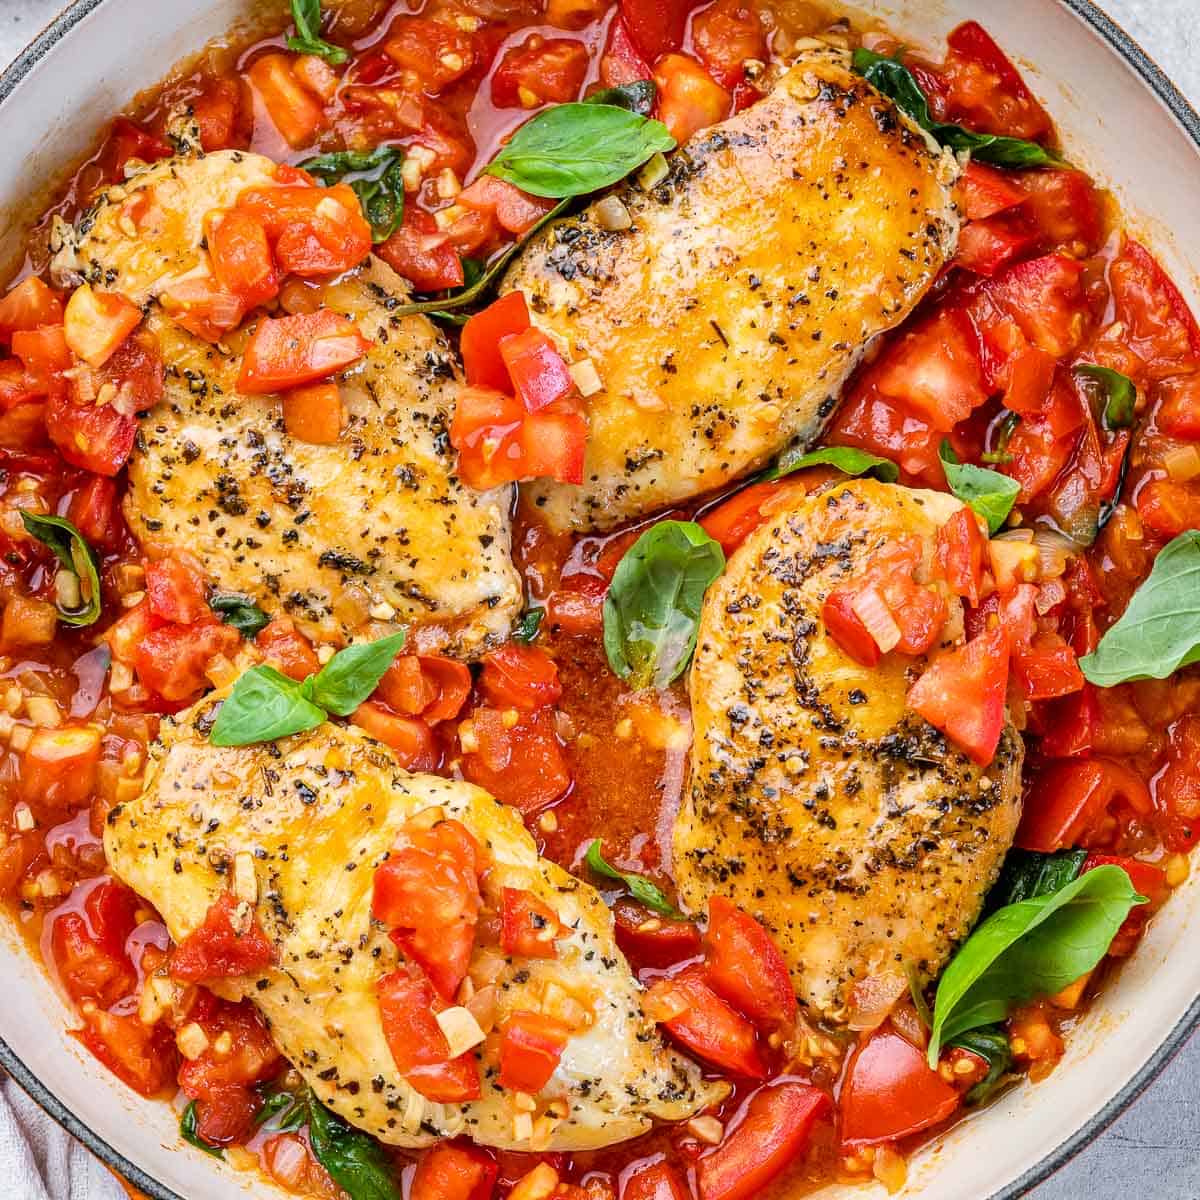 top view of 4 cooked seasoned chicken breasts in a red tomato base sauce and basil garnishes on an orange skillet